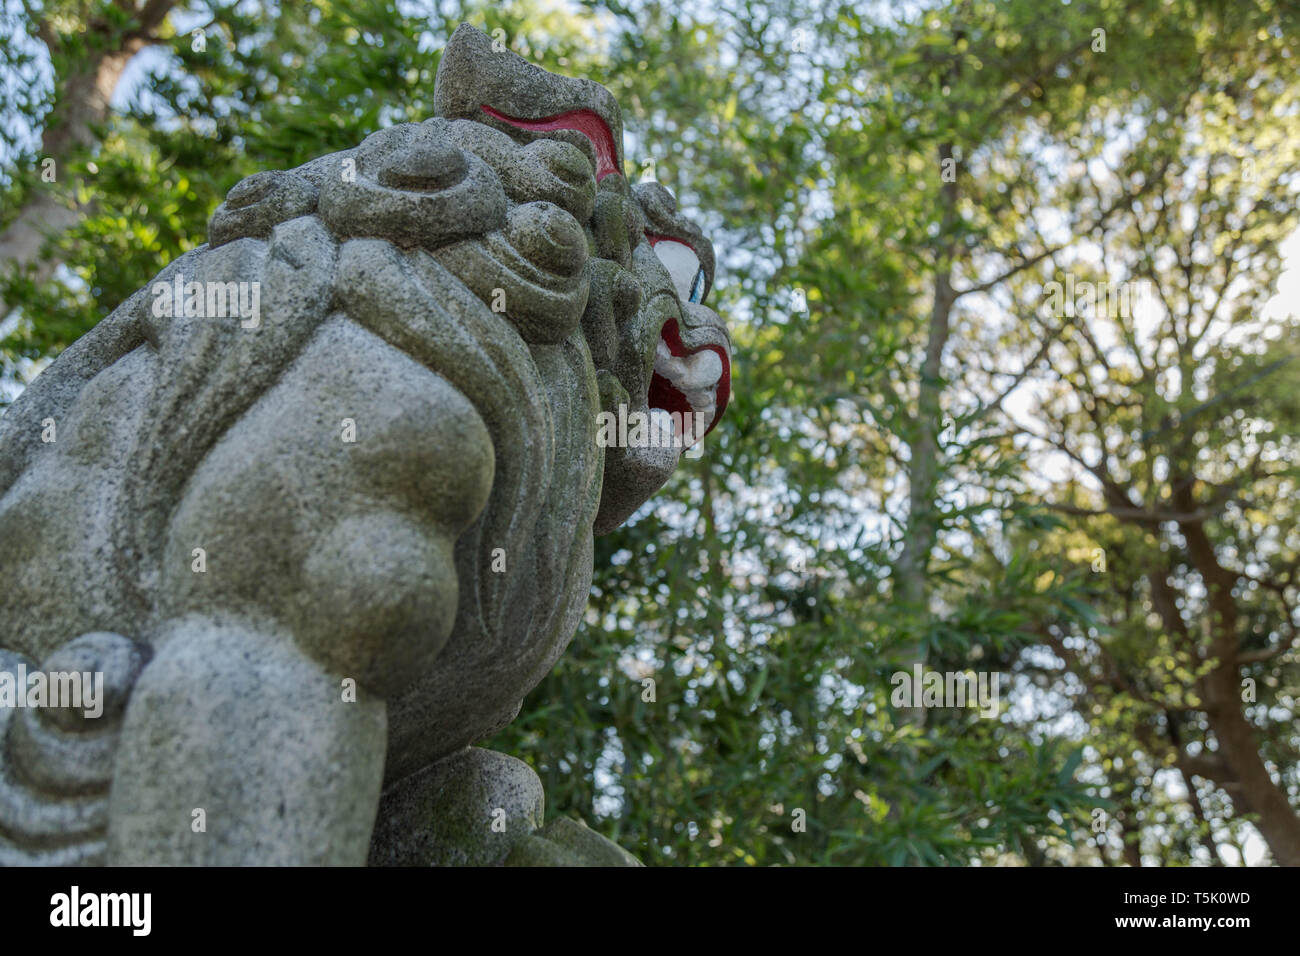 A partially painted foo dog called "koma inu" among japanese people guarding the premises of Maginu shrine located in Kawasaki, Japan. Stock Photo